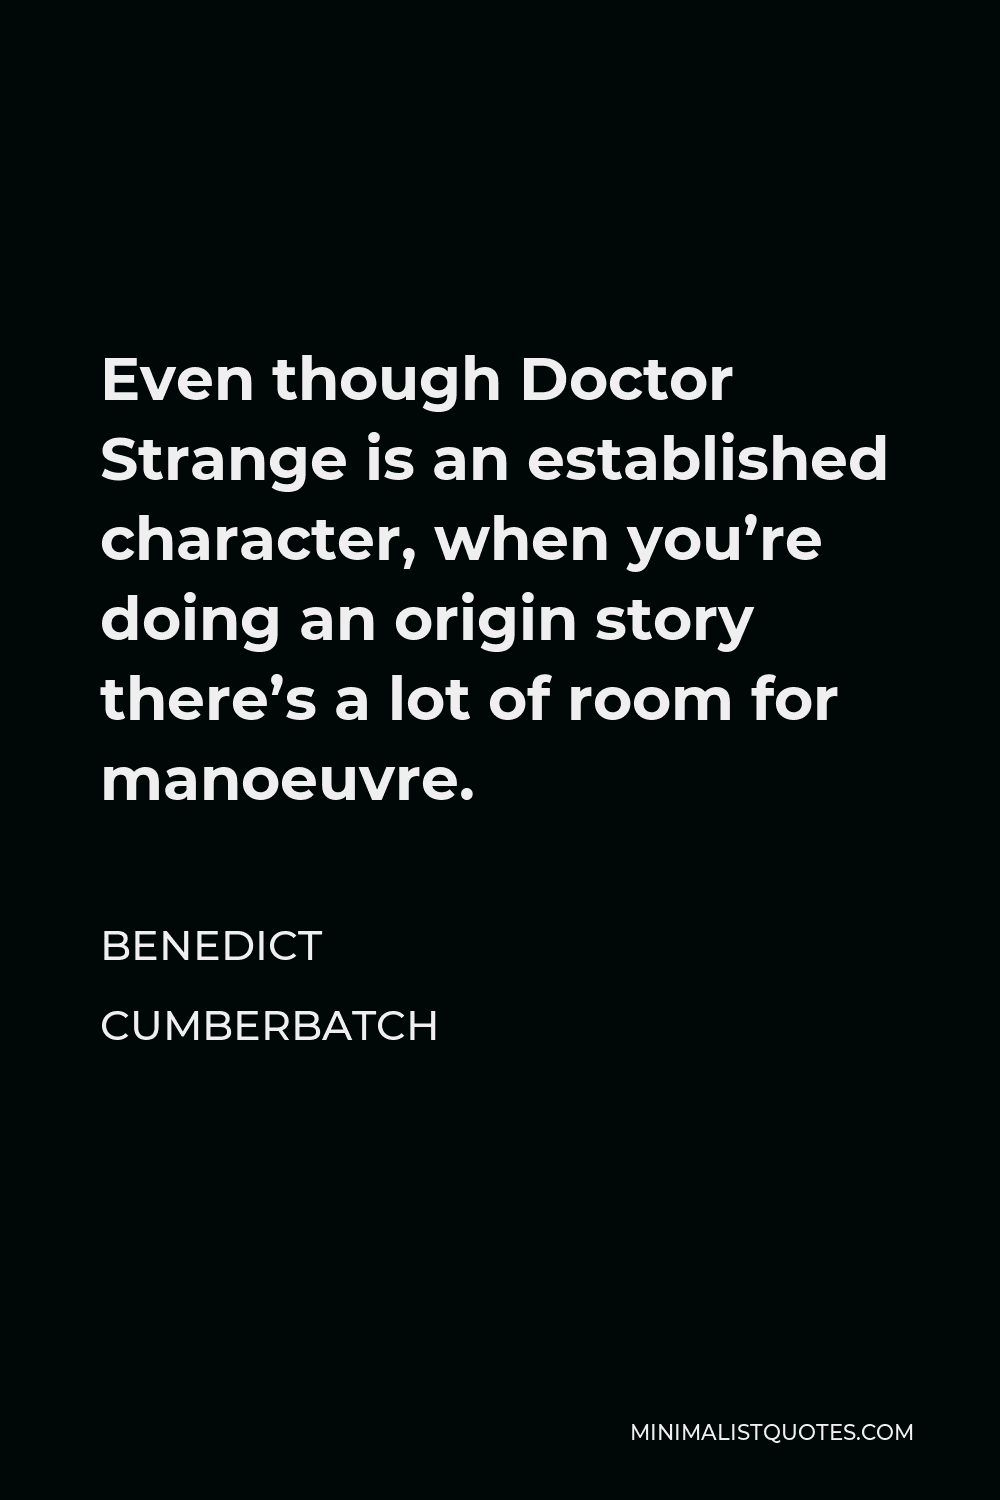 Benedict Cumberbatch Quote - Even though Doctor Strange is an established character, when you’re doing an origin story there’s a lot of room for manoeuvre.